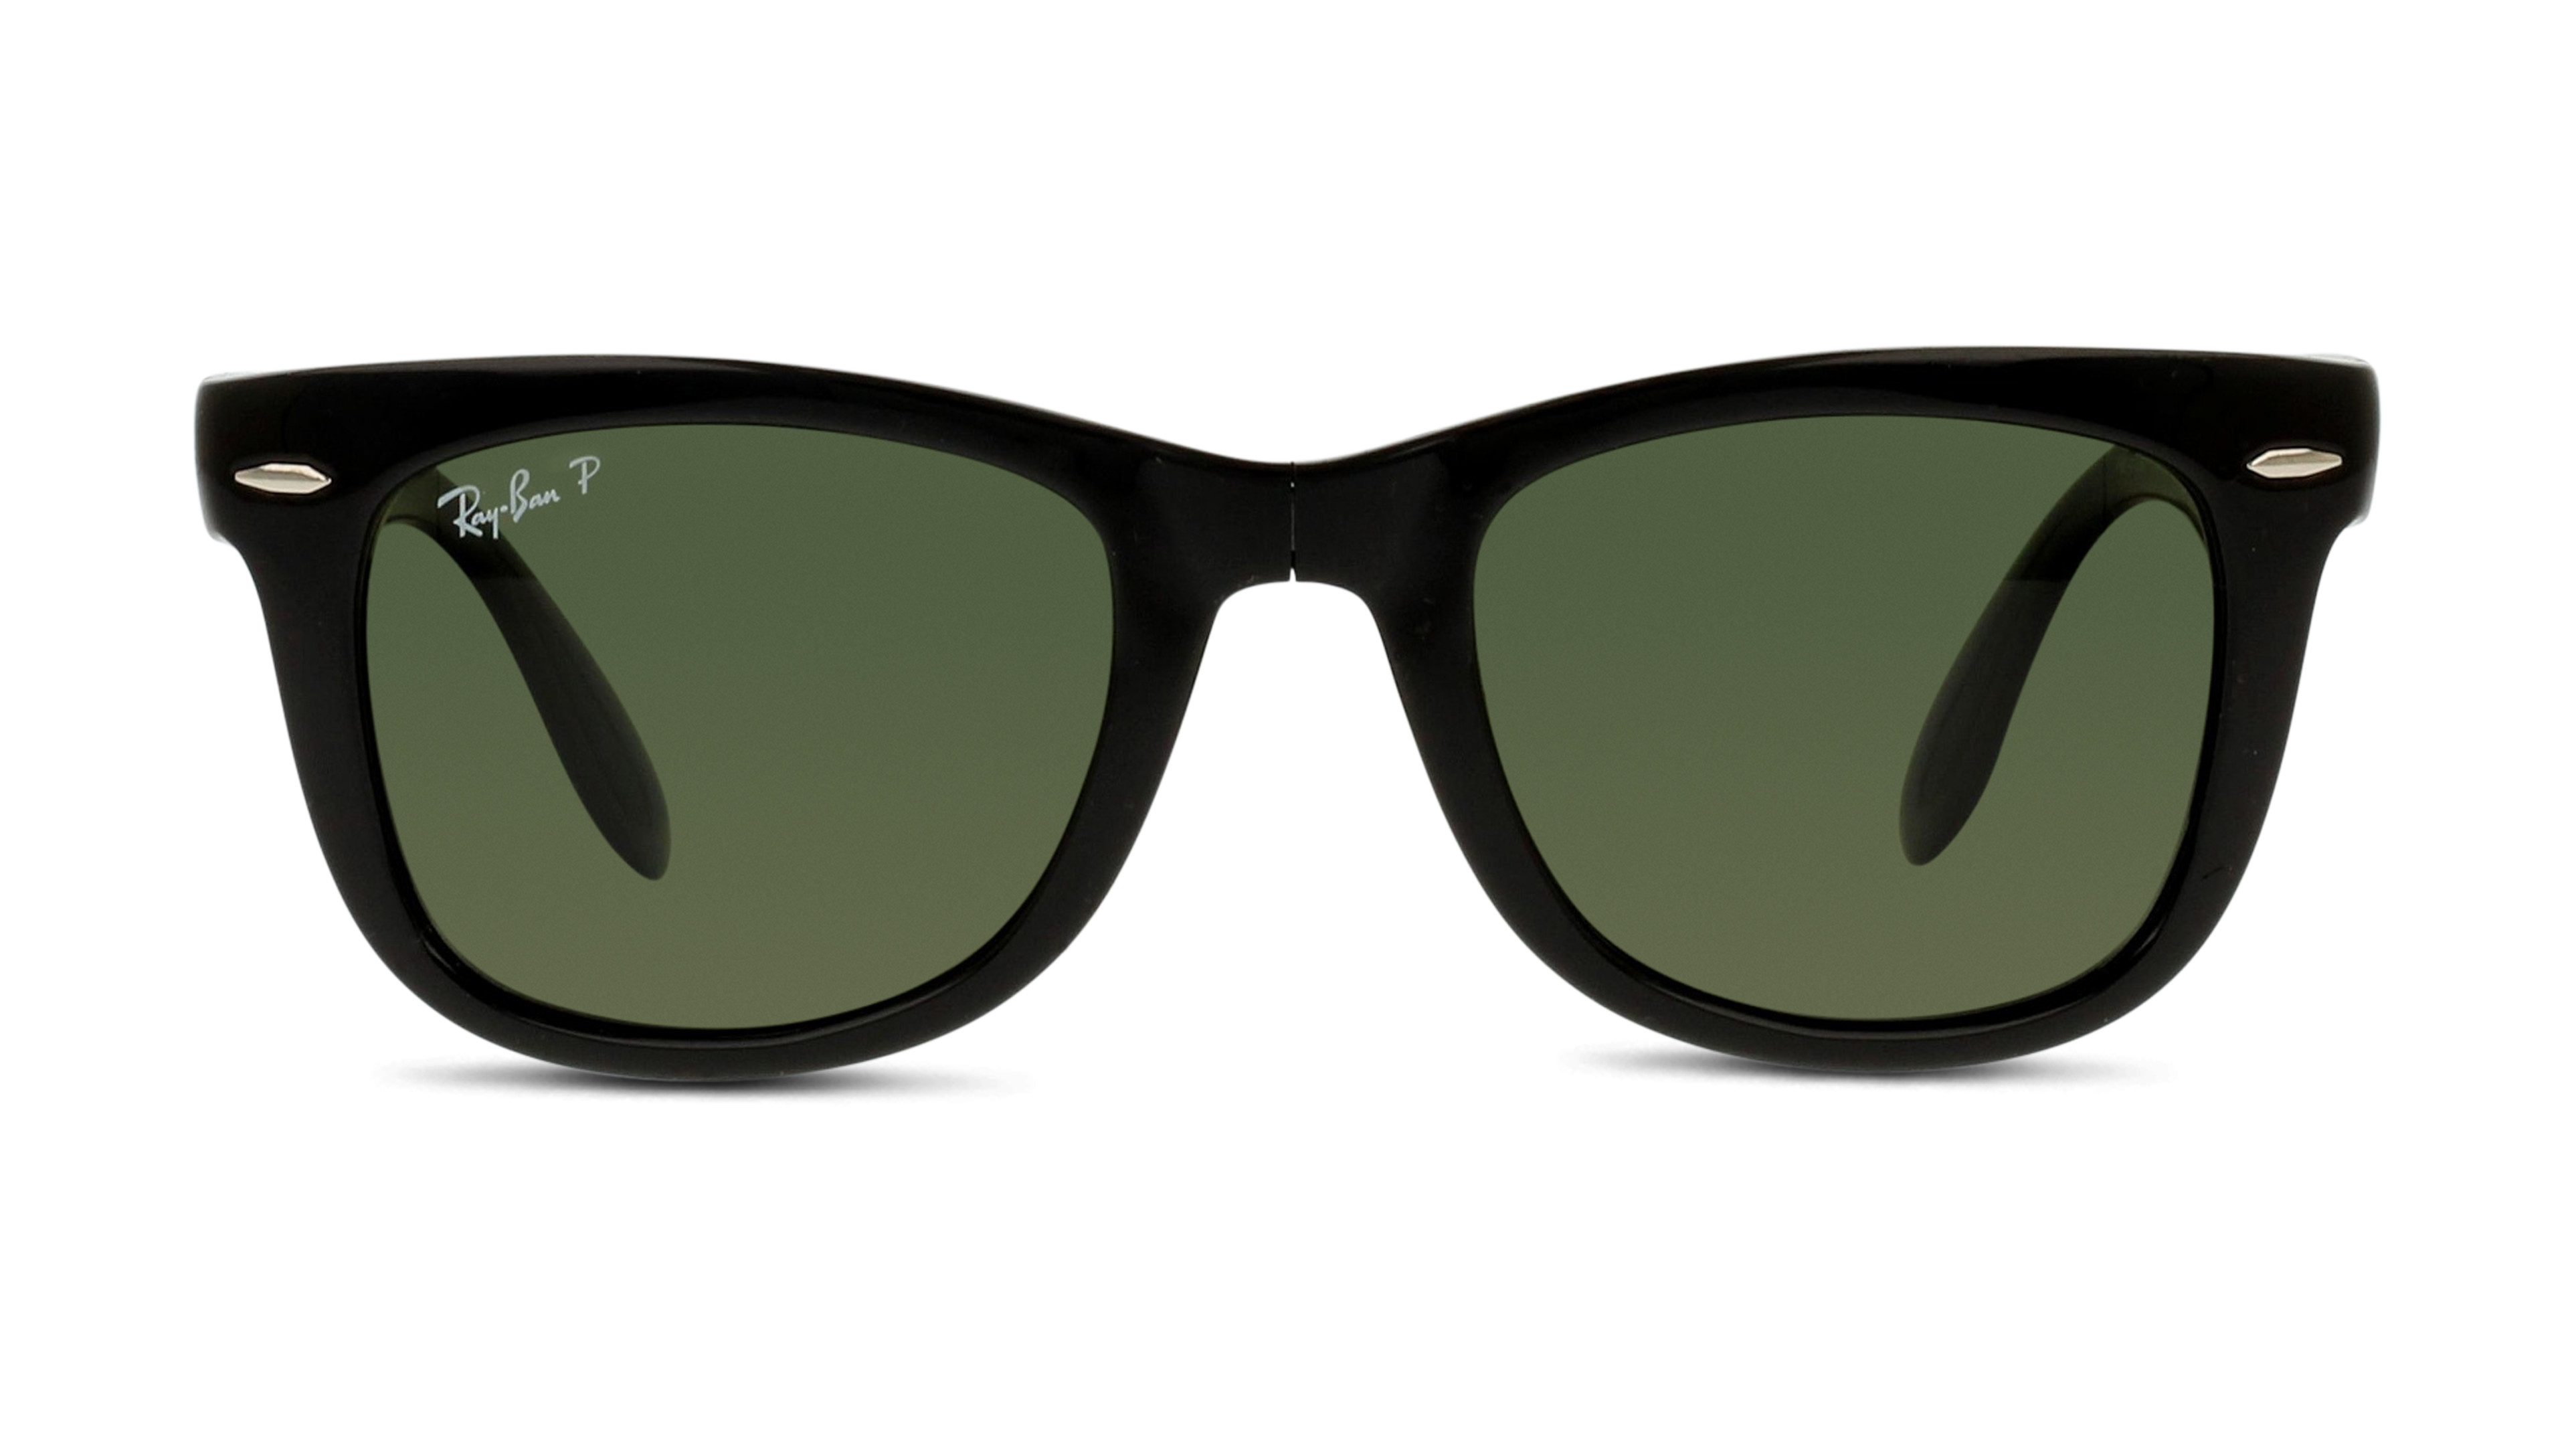 [products.image.front] Ray-Ban FOLDING WAYFARER 0RB4105 601/58 Sonnenbrille